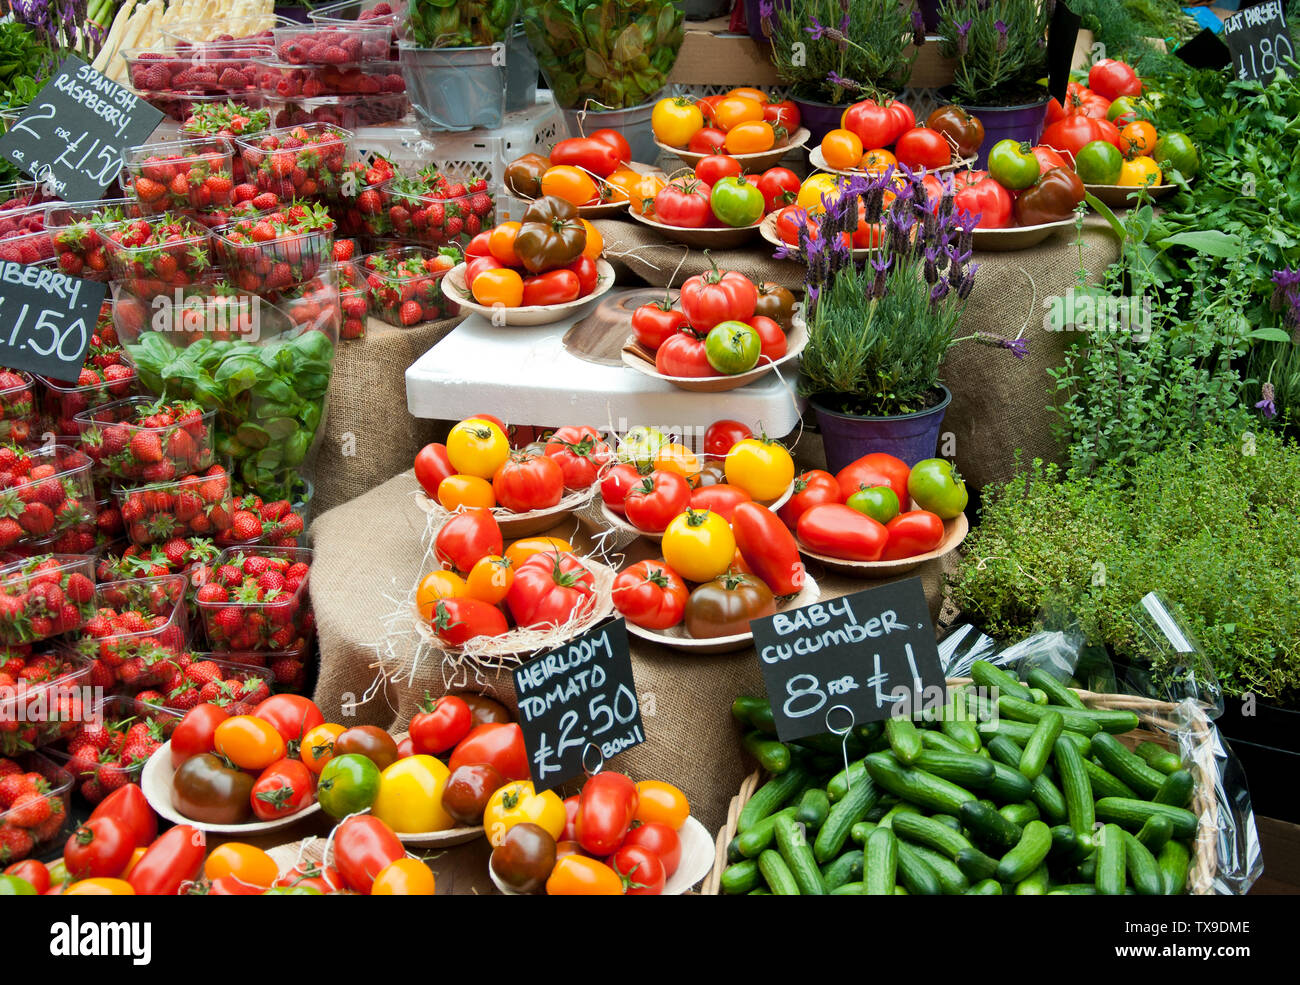 Fruit and vegetable market stall in Borough Market, London Stock Photo